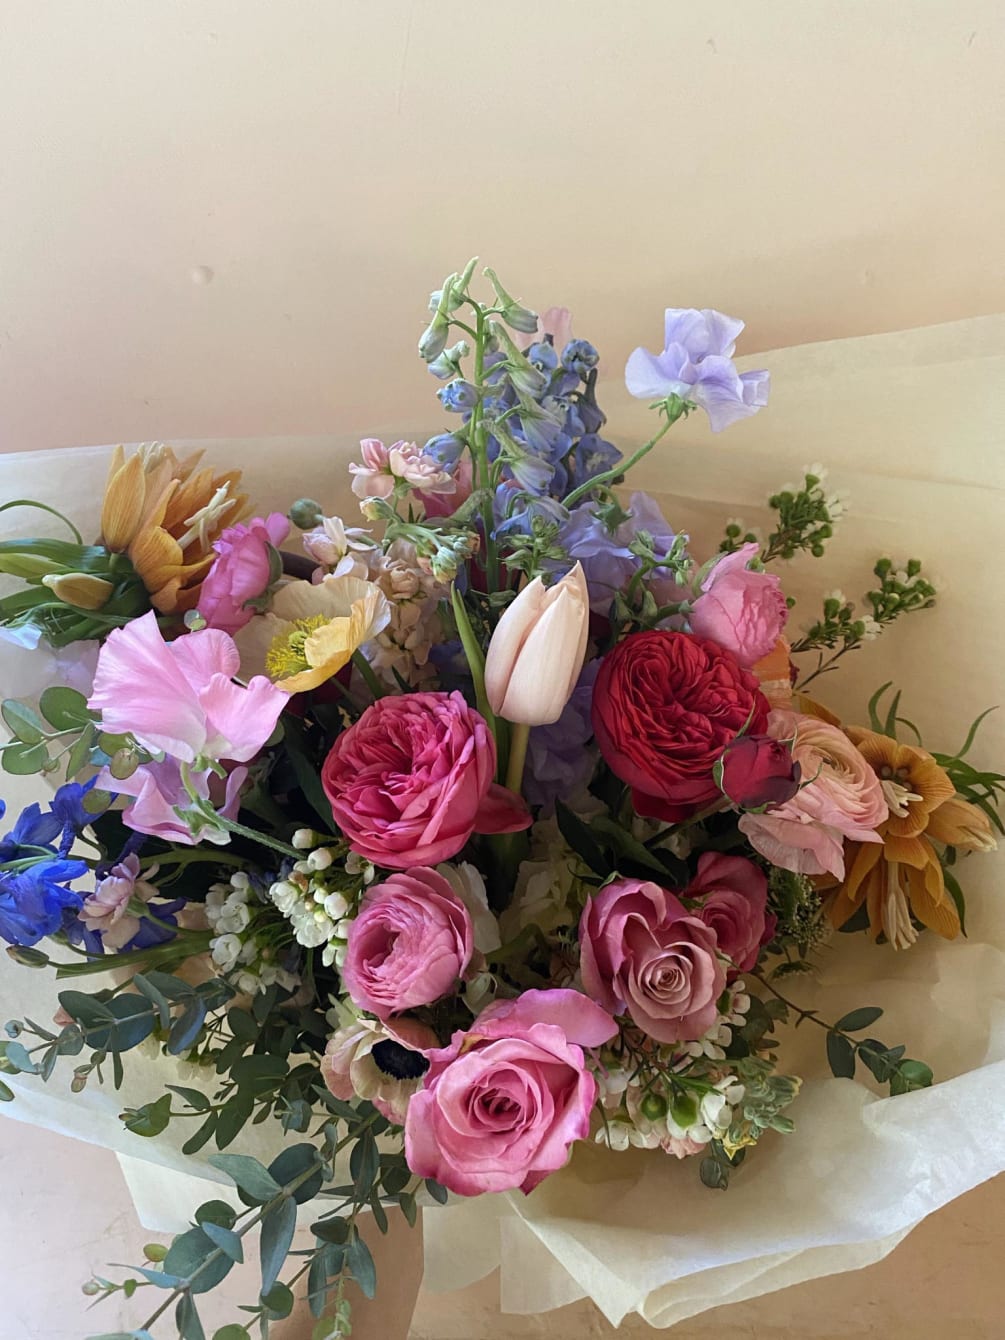 Lovely and joy bringing hand tied bouquet of pretty bright colors of